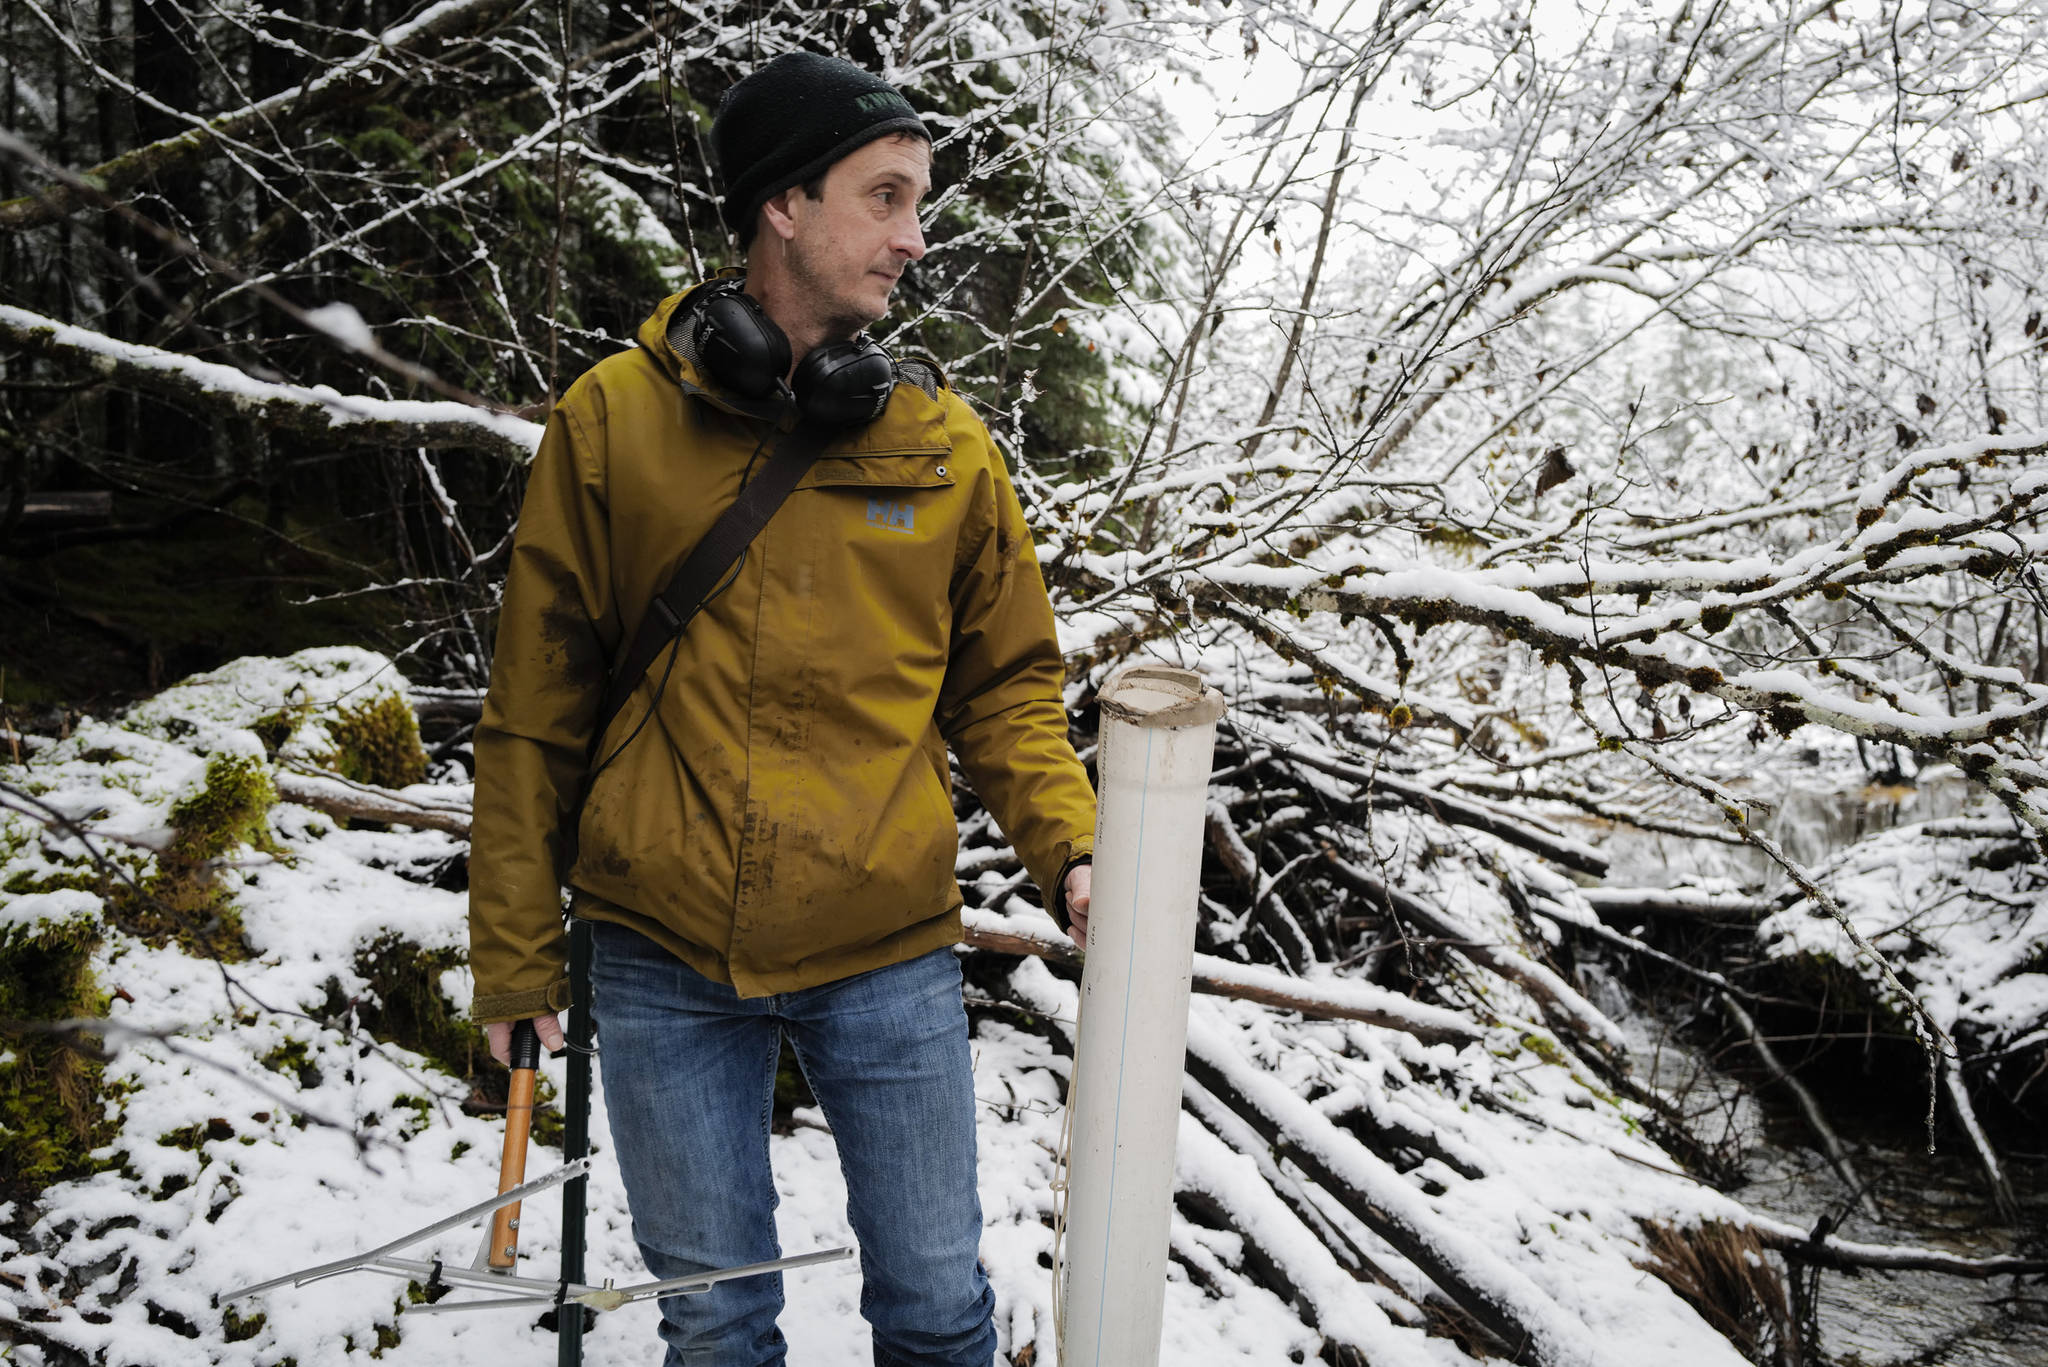 Jake Musslewhite, a fisheries biologist with the U.S. Forest Service, pauses while searching for a radio fish tag in Dredge Lake on Wednesday, Dec. 4, 2019. Musslewhite has been conducting a study tracking adult coho salmon in the Dredge Lakes drainage system. Learn more by watching the video below. (Michael Penn | Juneau Empire)